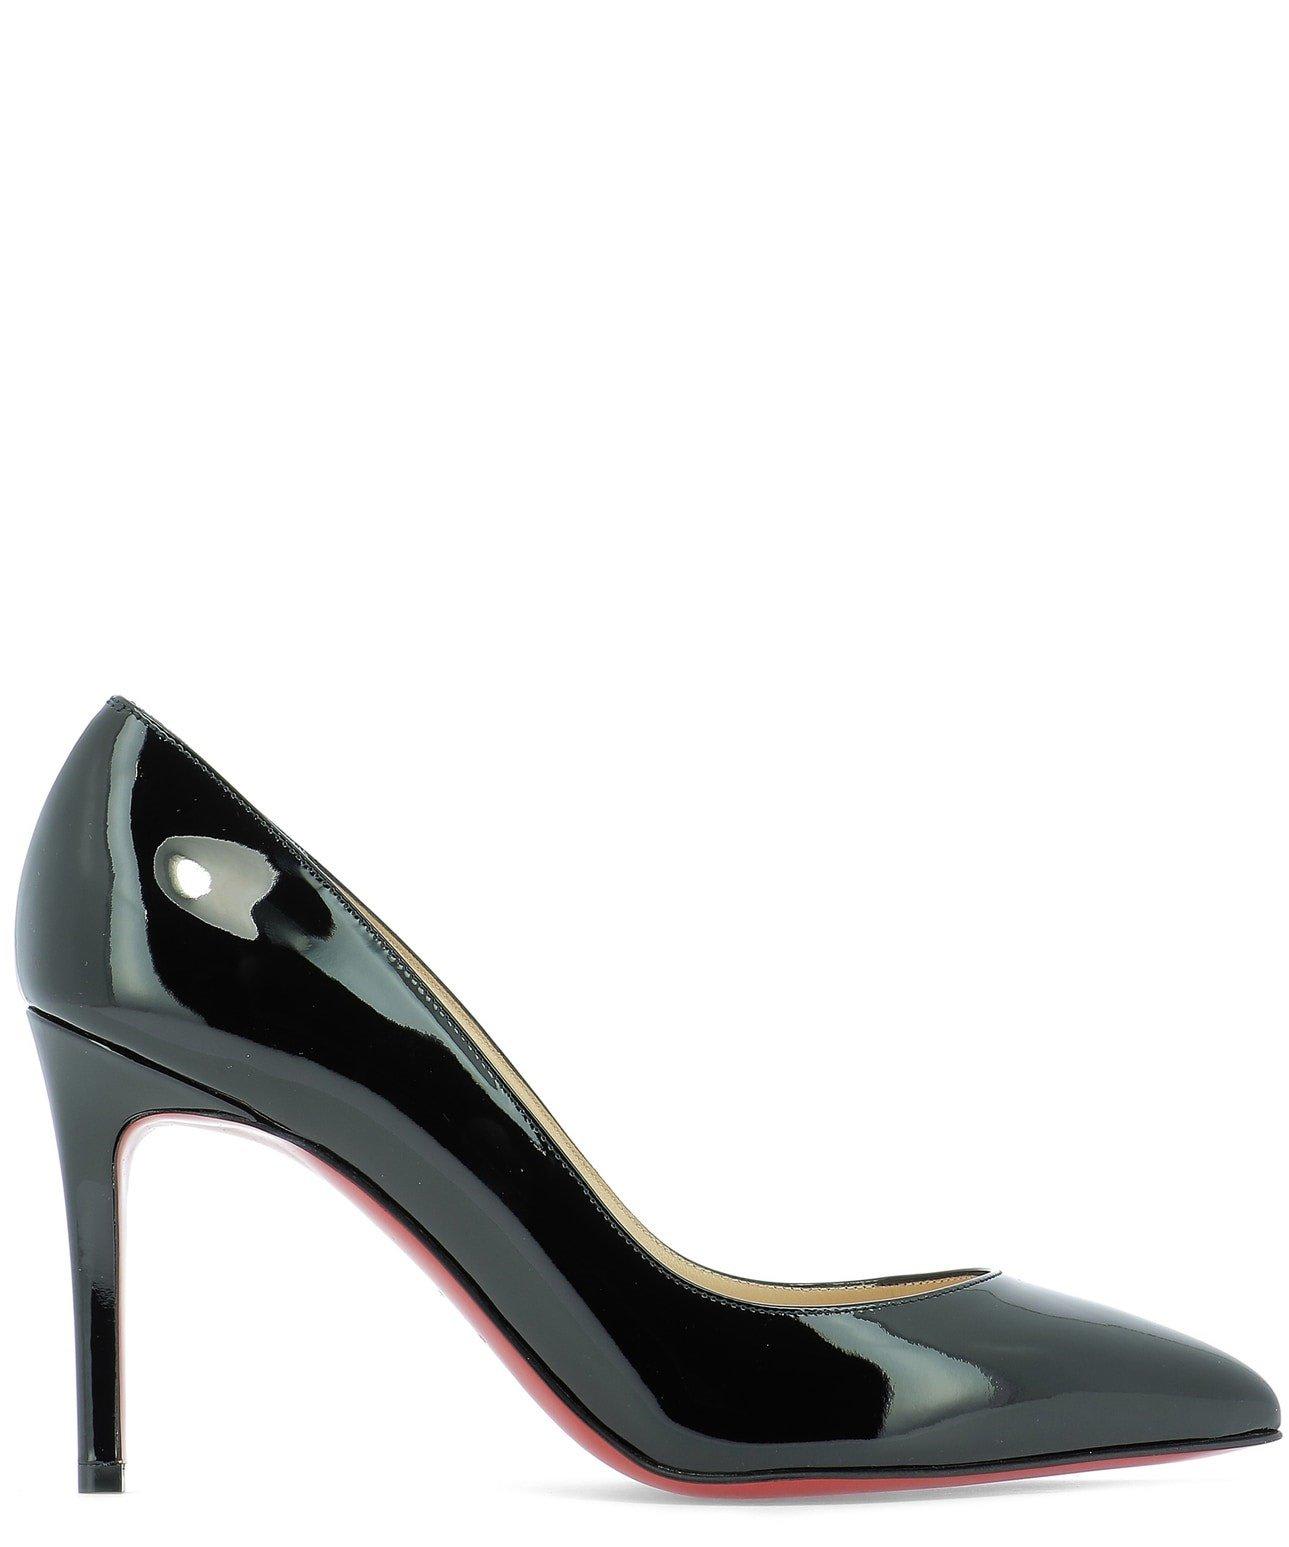 CHRISTIAN LOUBOUTIN PIGALLE POINTED TOE PUMPS